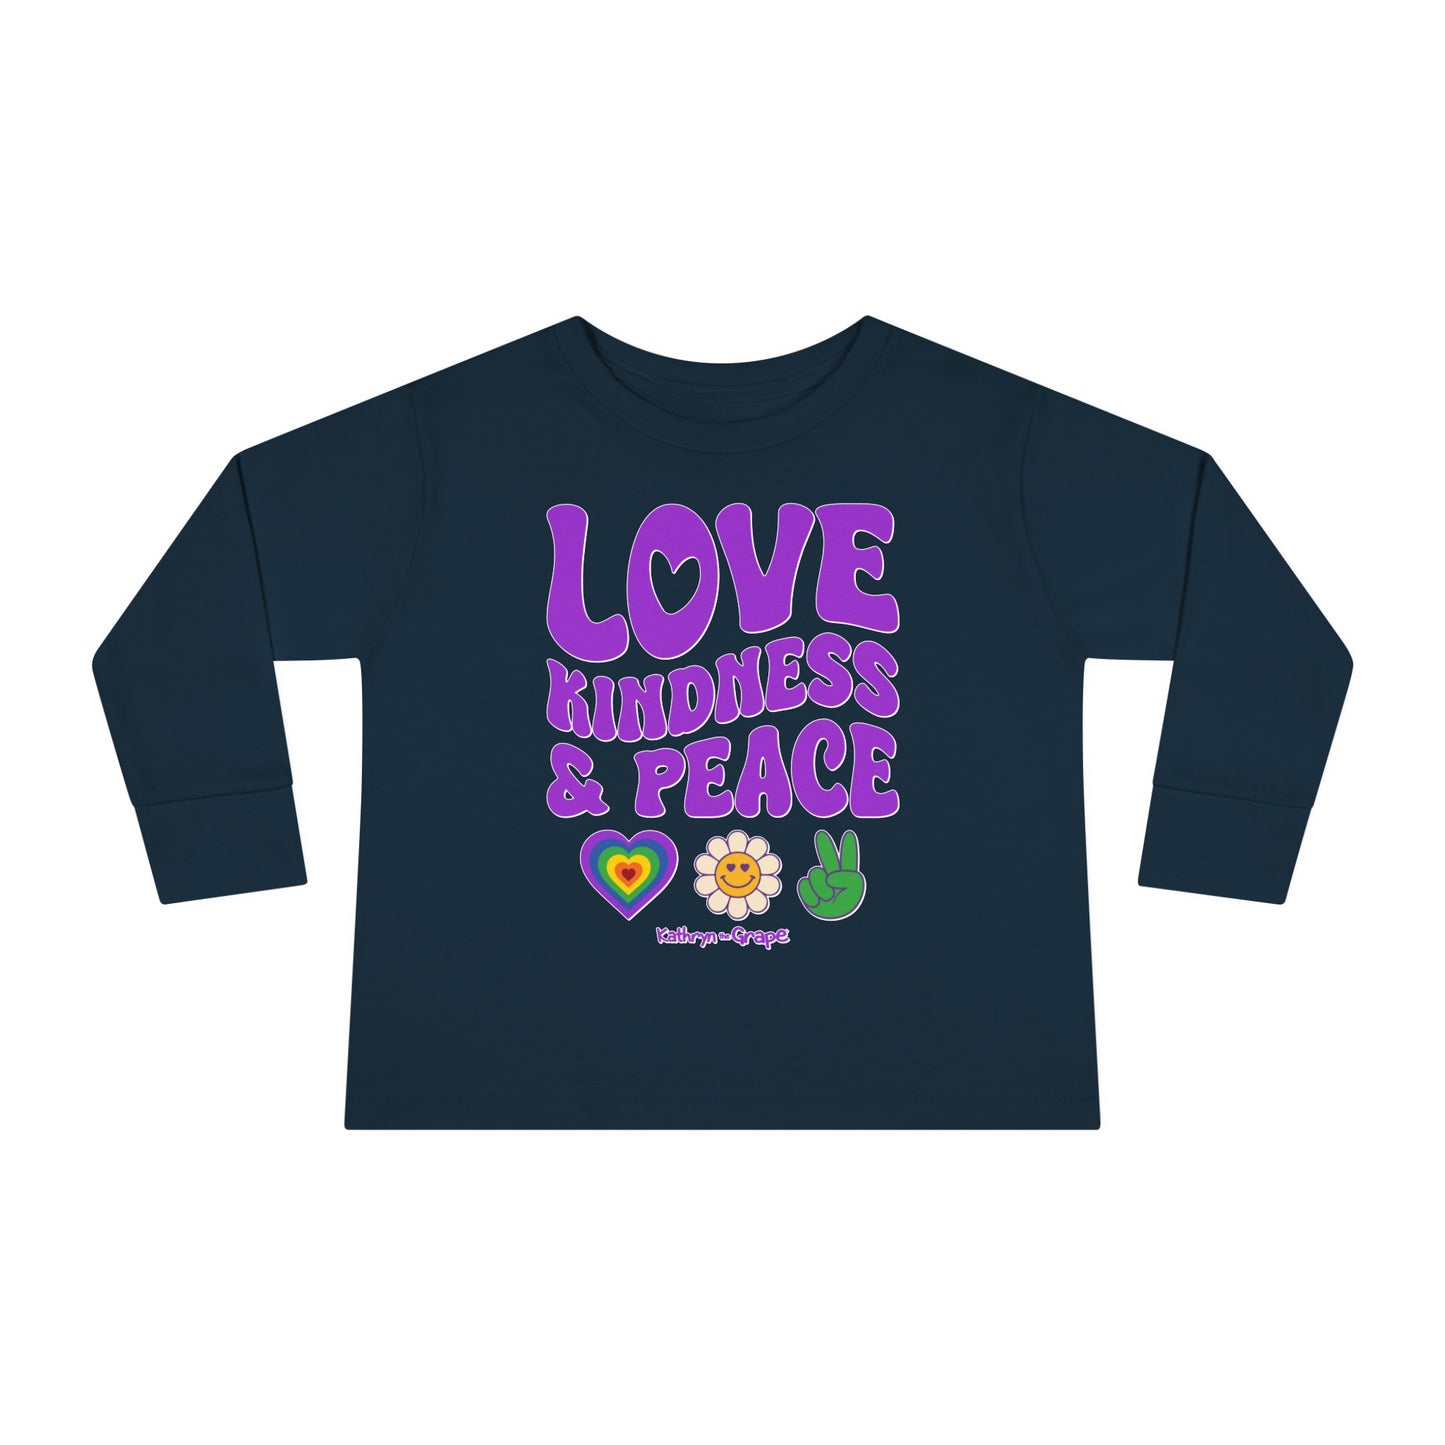 Kathryn the Grape Love, Kindness, and Peace Toddler Long Sleeve Tee